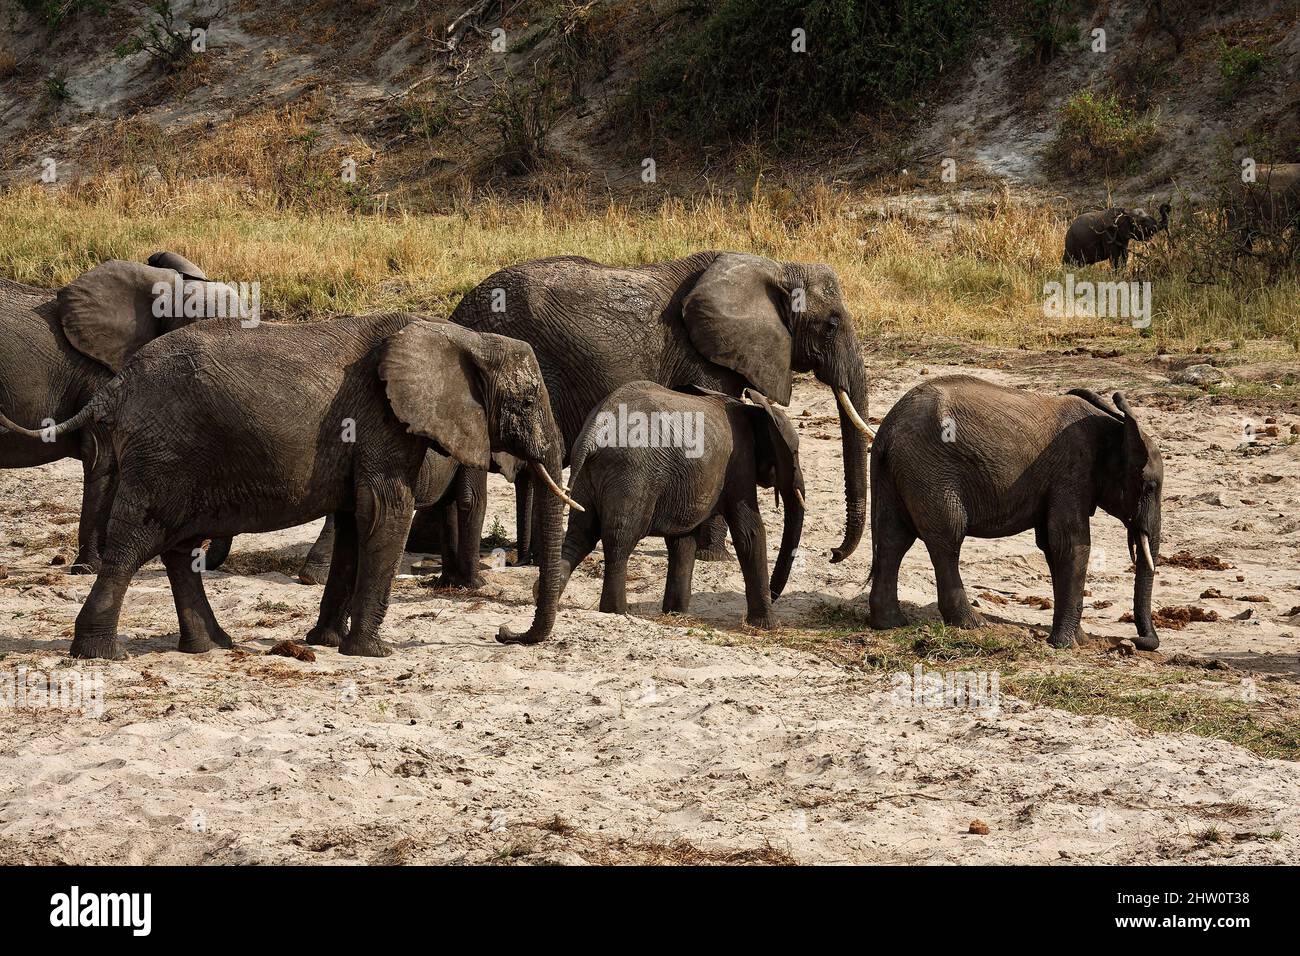 5 African elephants, adults, young, walking, Loxodanta africana, herbivores, largest land mammal, muscular trunk, tusks, large ears, wildlife, animals Stock Photo